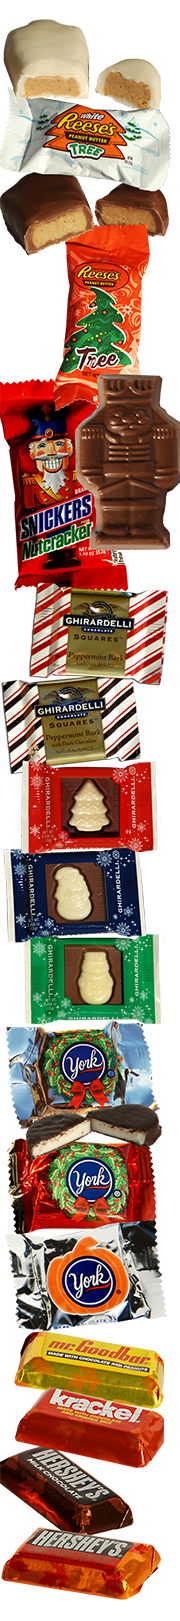 Brandname candy limited edition seasonal offerings